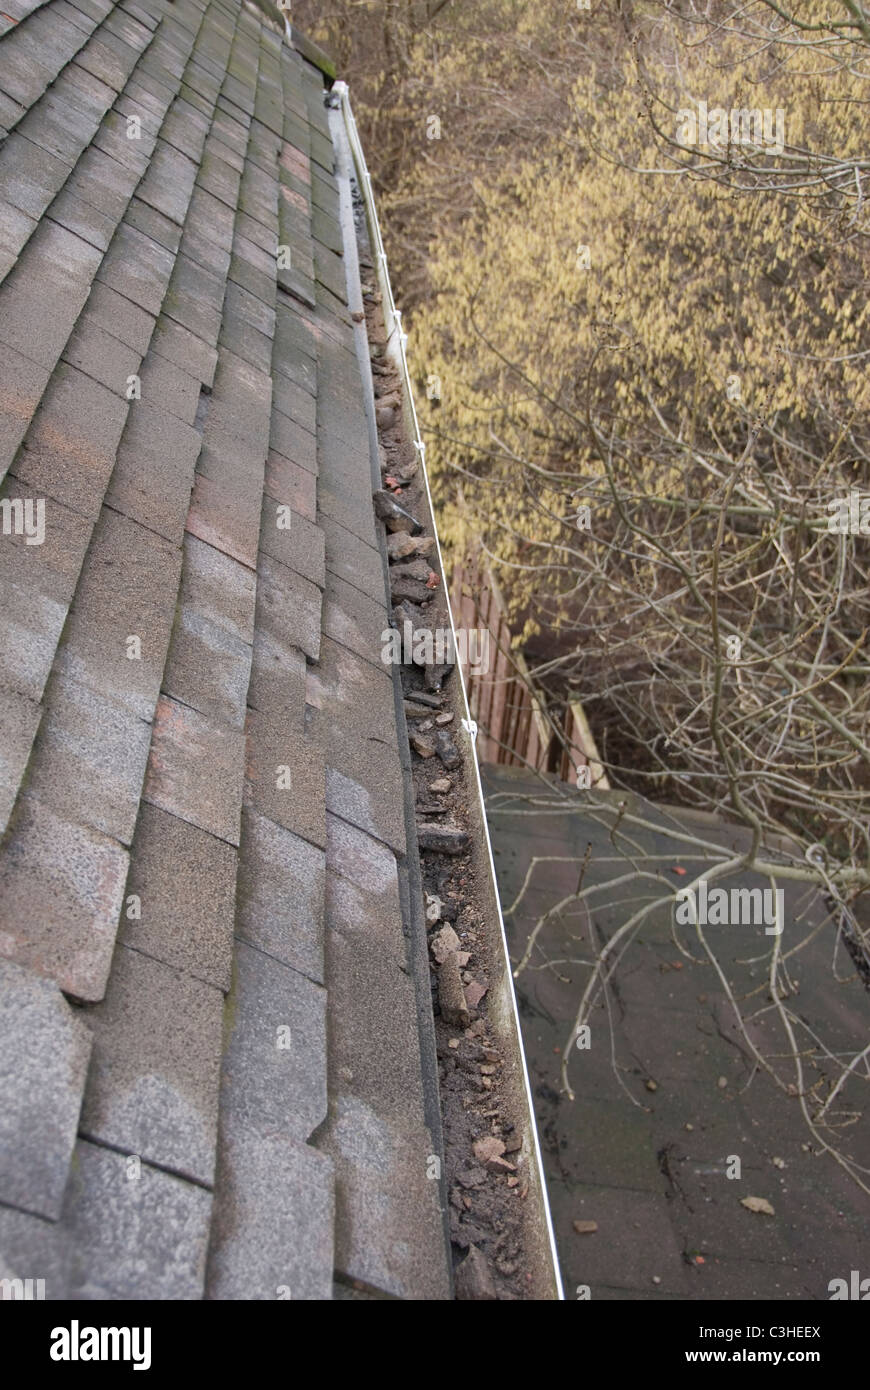 Close up on Roof Gutters Full of Rubble and Dirt, Re Roofing Detail Sheffield, England Stock Photo